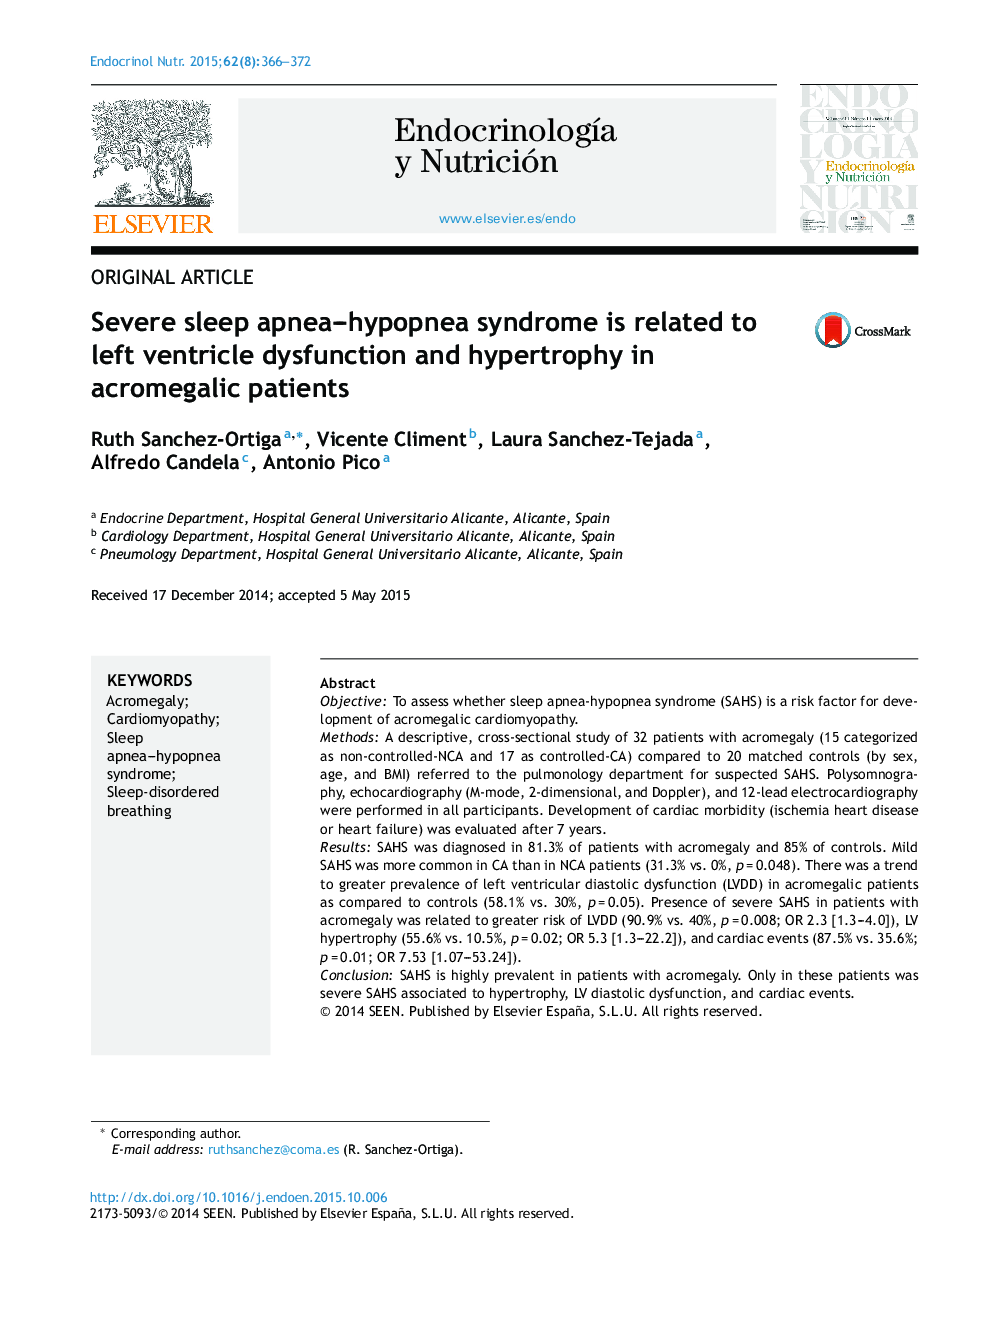 Severe sleep apnea-hypopnea syndrome is related to left ventricle dysfunction and hypertrophy in acromegalic patients